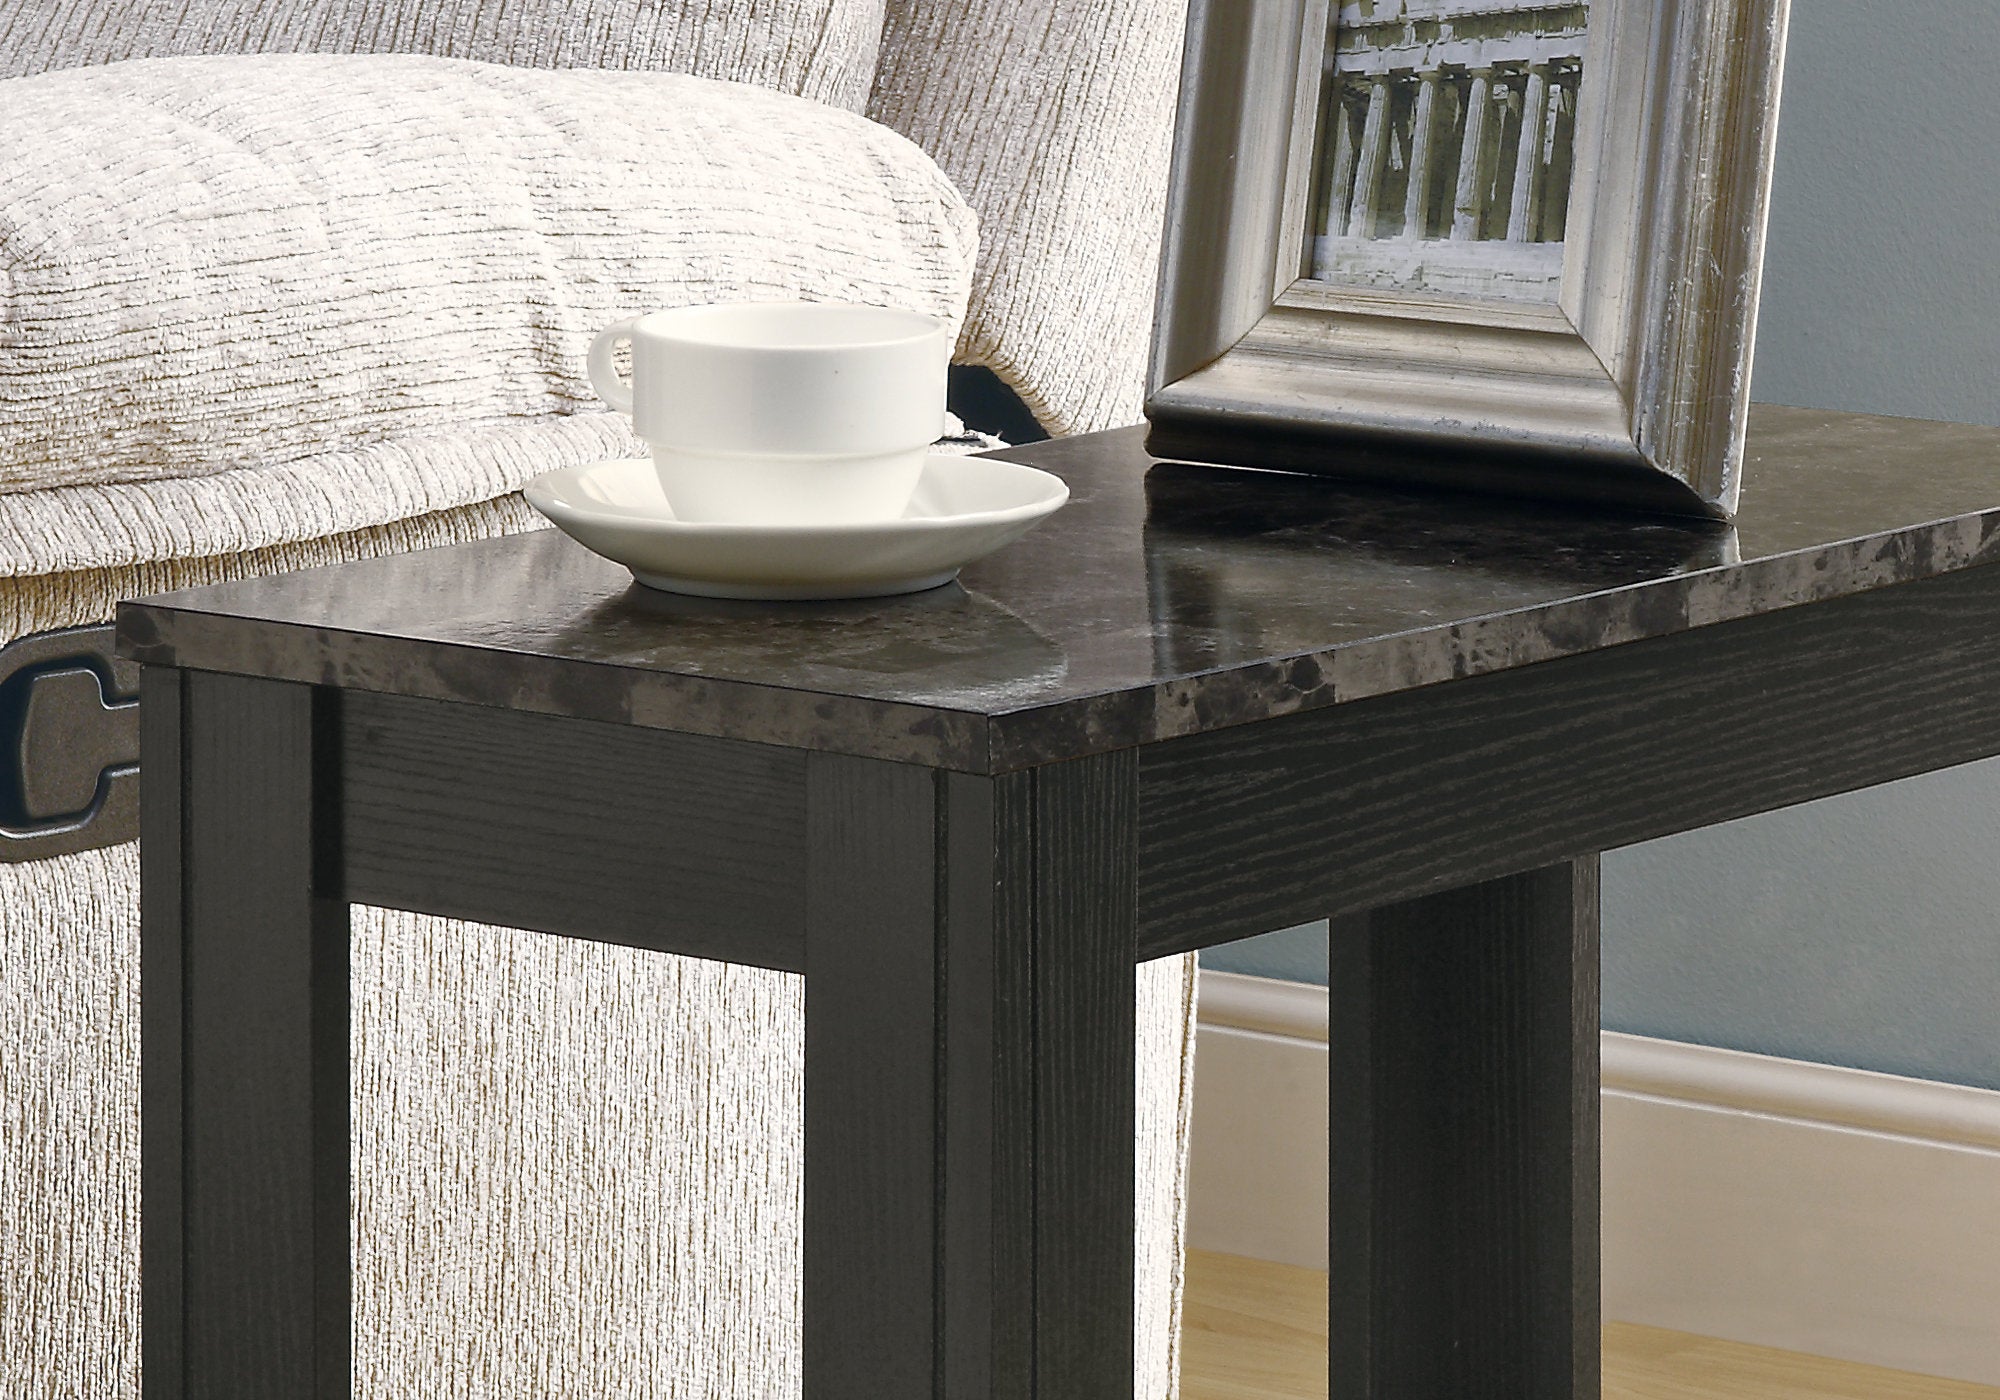 24" Gray And Black Console Table